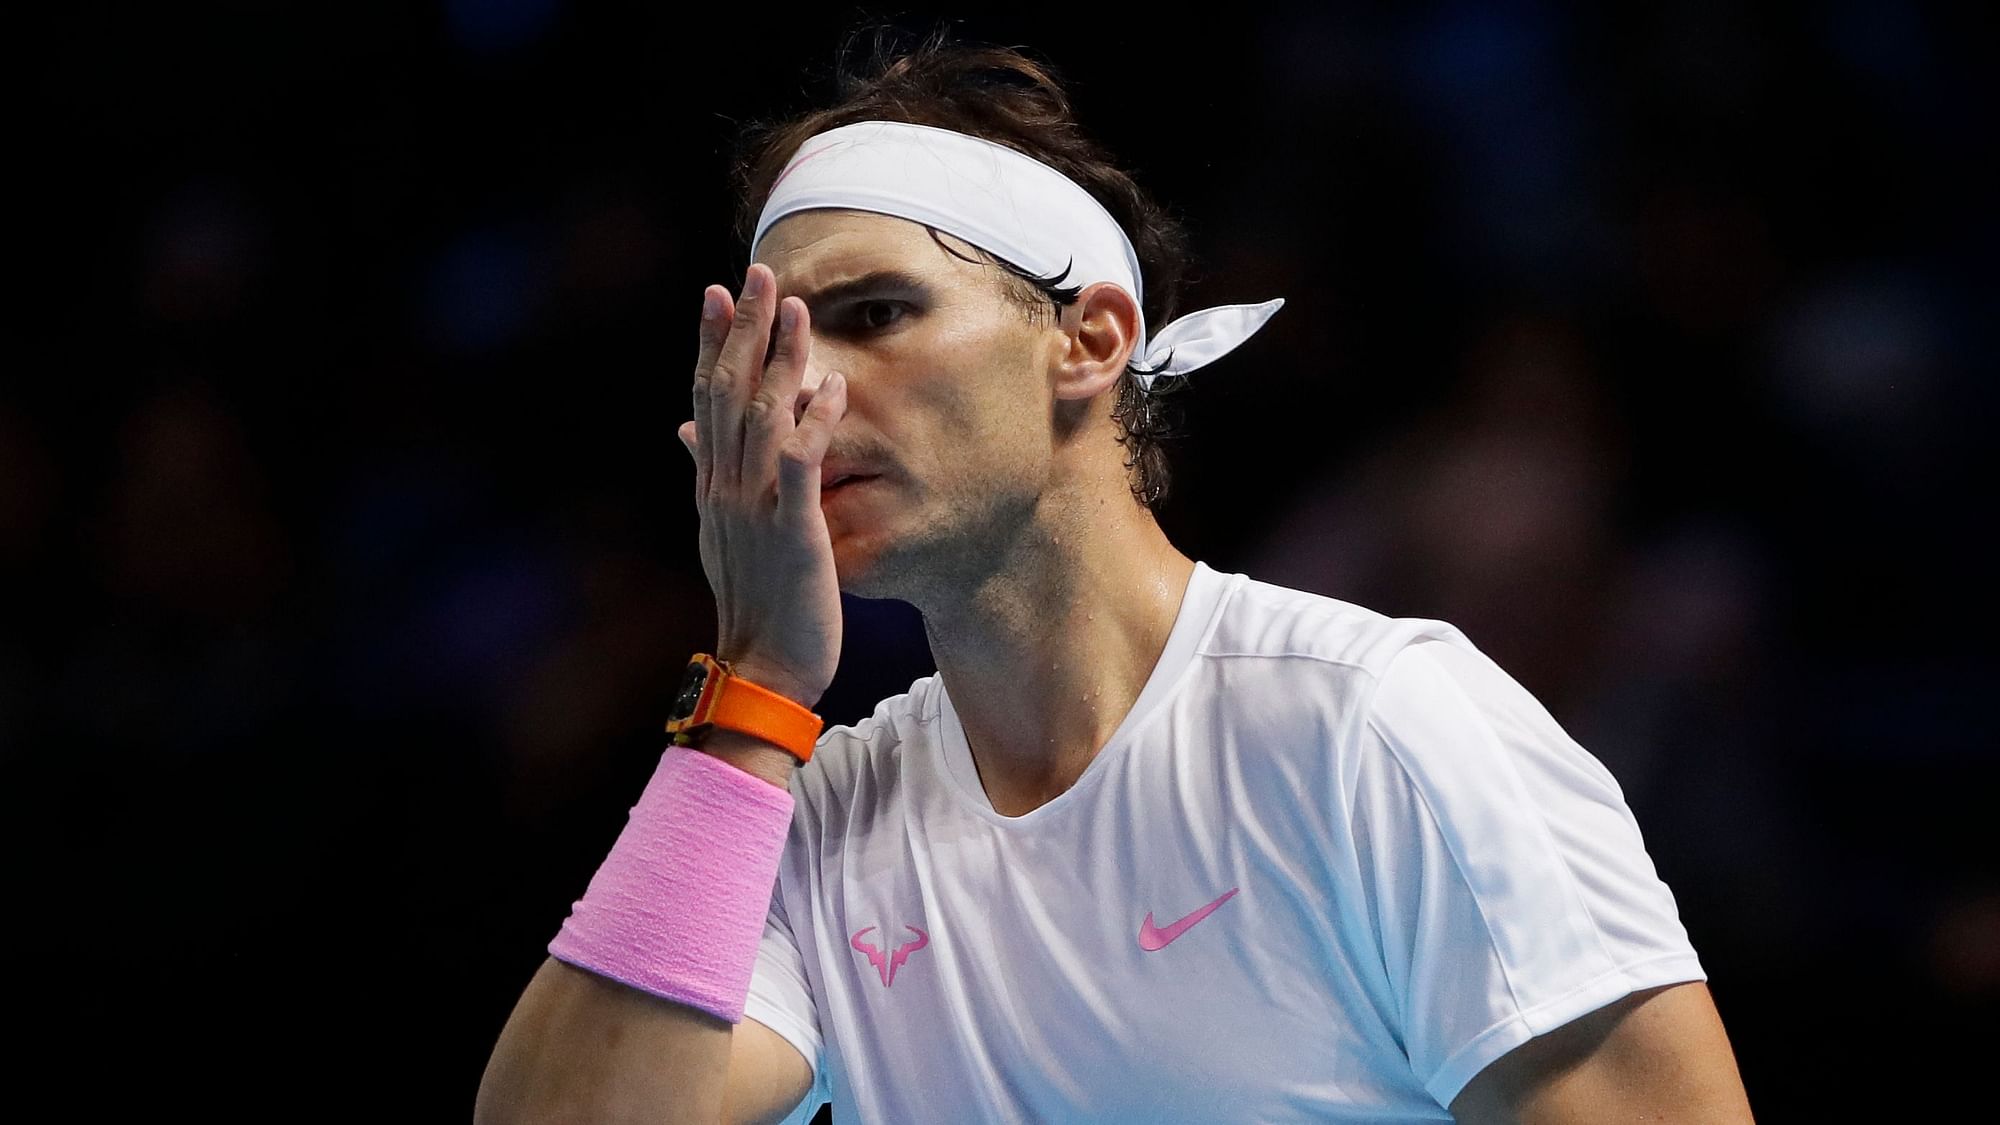 Rafael Nadal of Spain reacts during his ATP World Tour Finals singles tennis match against Alexander Zverev of Germany at the O2 Arena in London, Monday, Nov. 11, 2019.